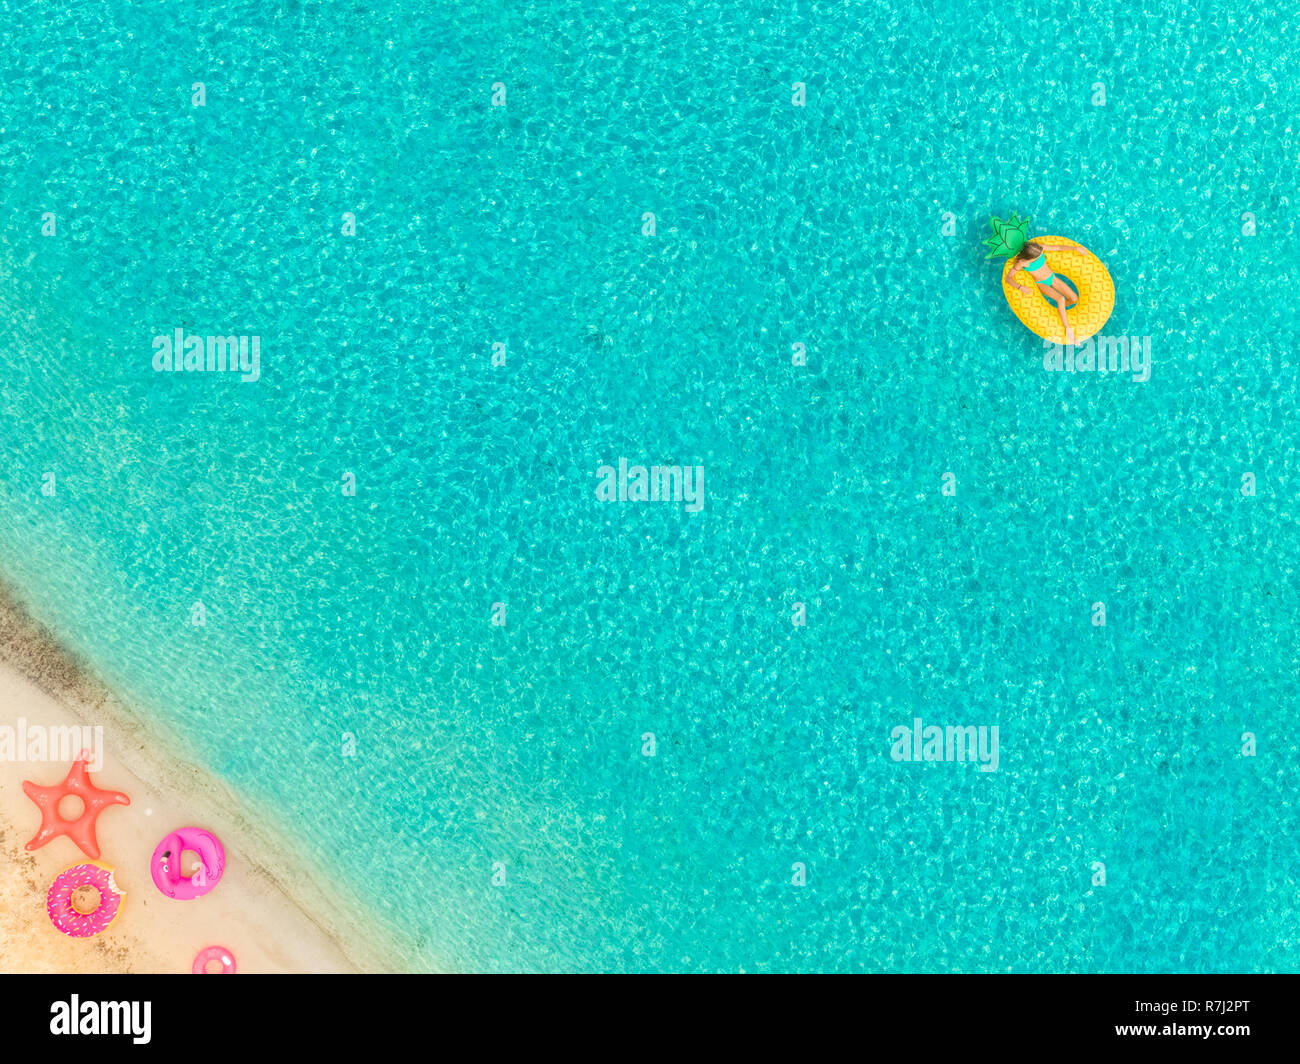 Aerial view of woman floating on inflatable pineapple mattress by sandy beach and inflatable rings. Stock Photo